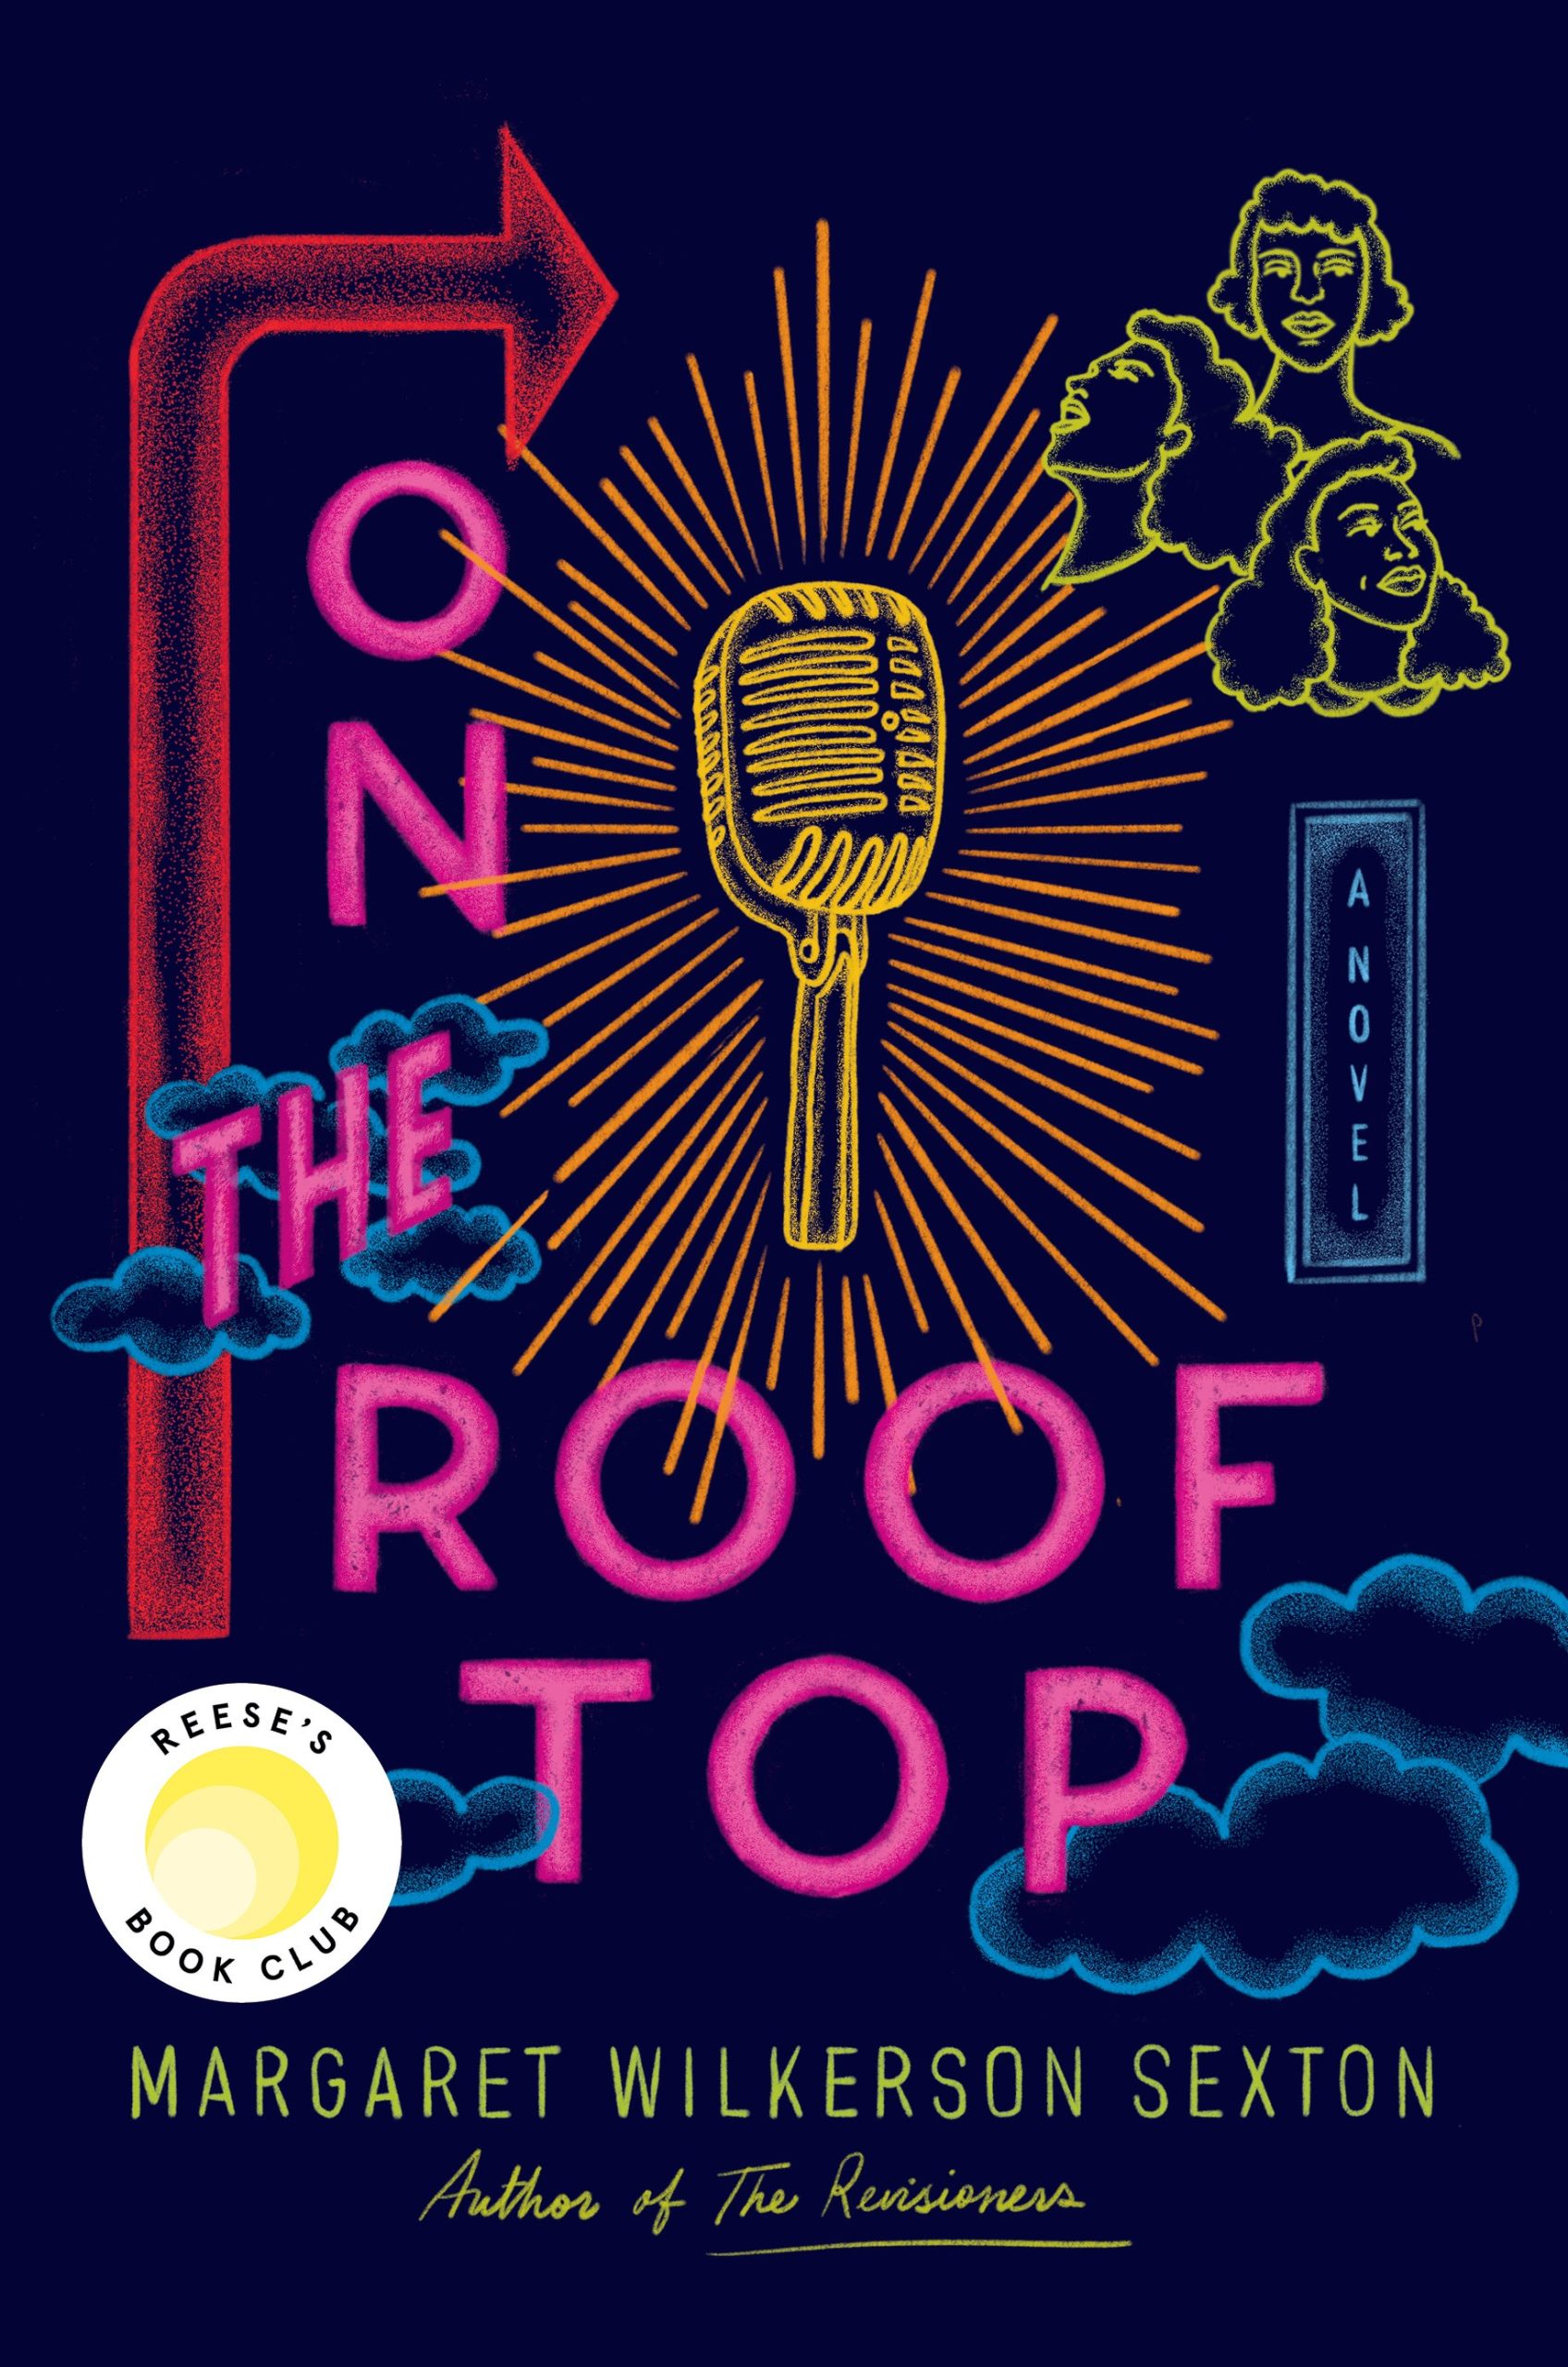 On the Rooftop, by Margaret Wilkerson Sexton